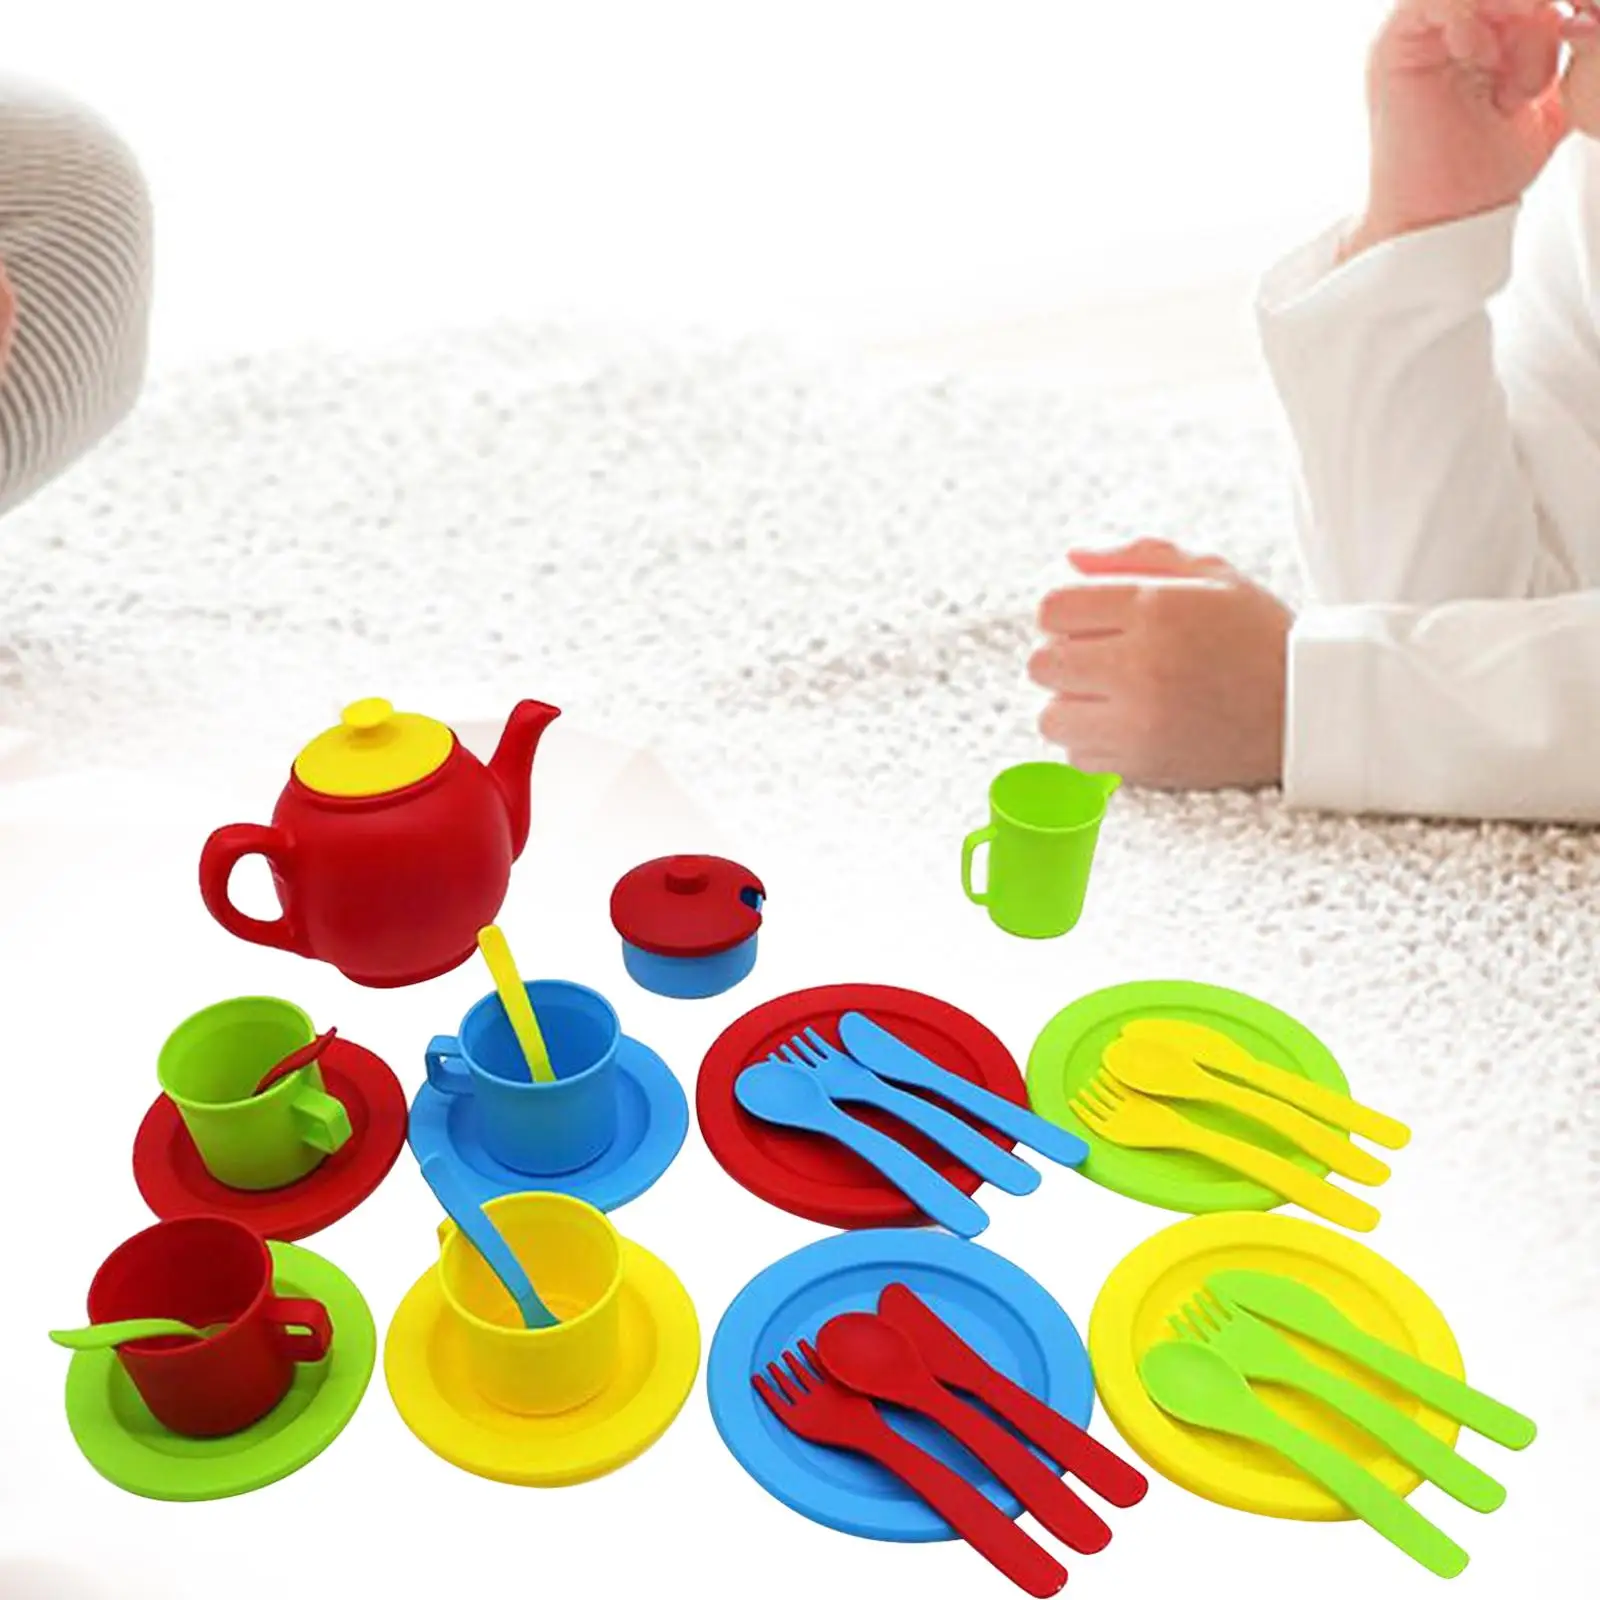 35x Kids Afternoon Tea Set kitchen Playset Simulation Play House Kitchen Children`s Toy Cute for Holiday Gifts Toddler Kids